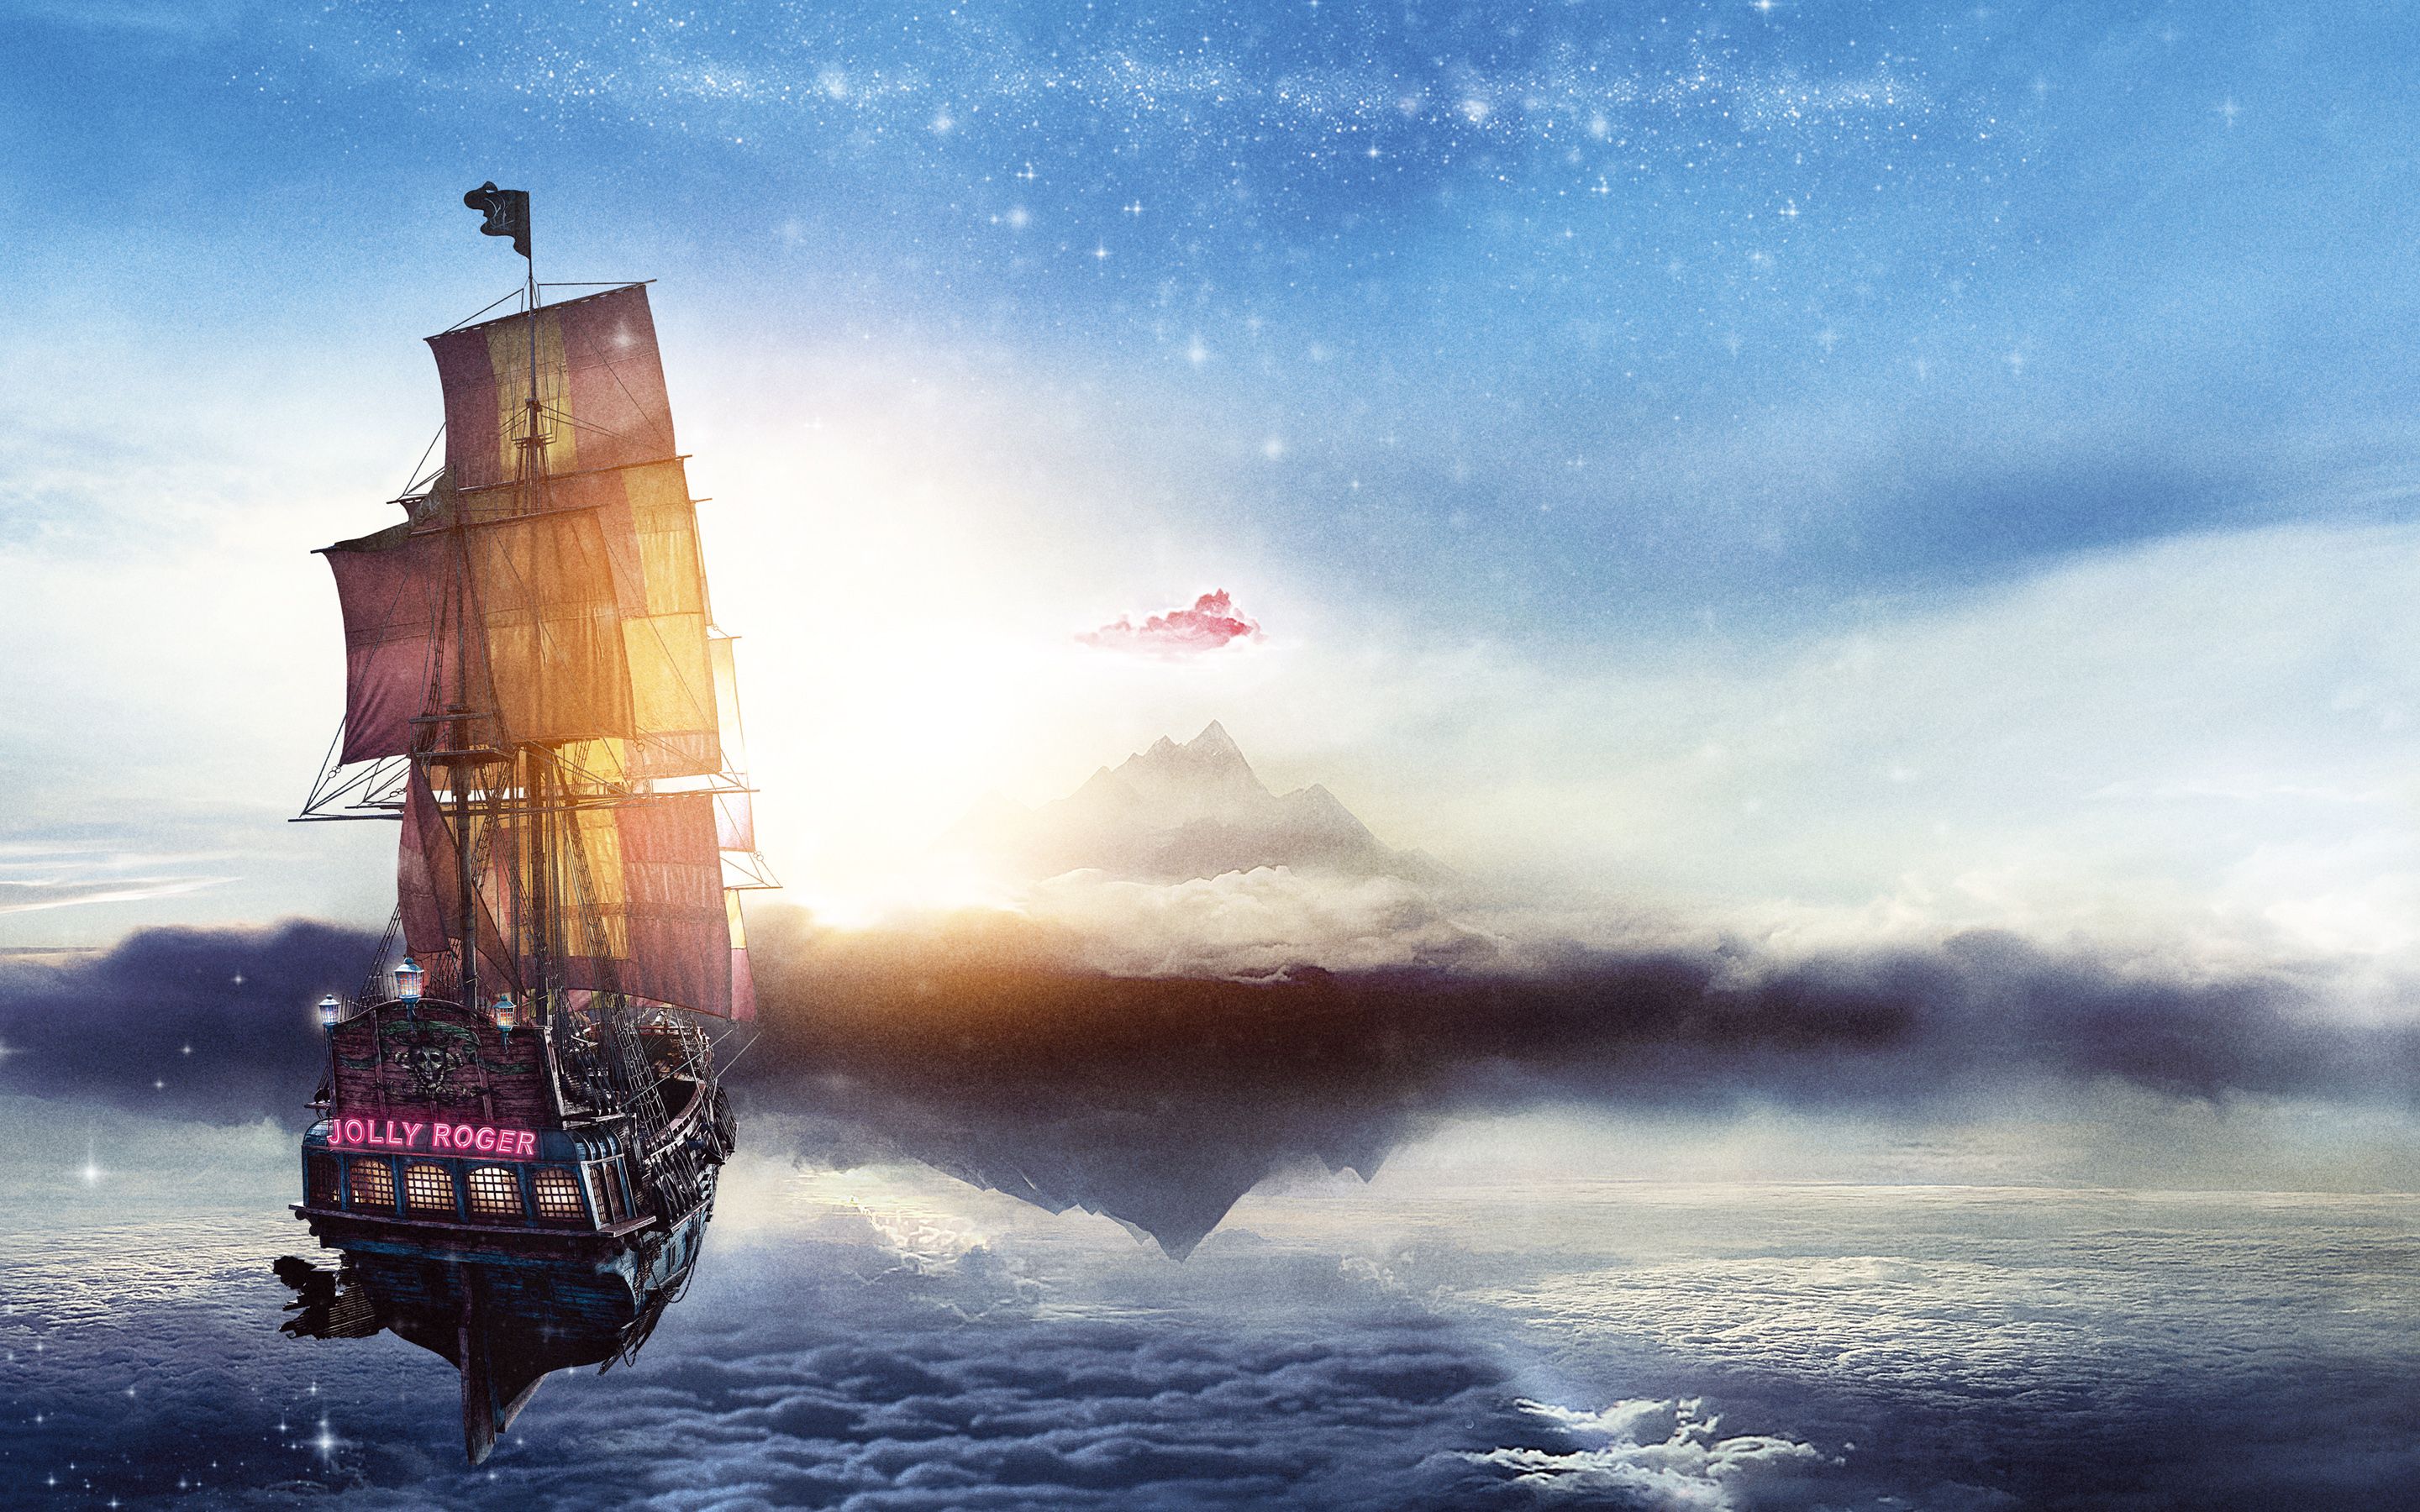 Pirate 4K wallpaper for your desktop or mobile screen free and easy to download